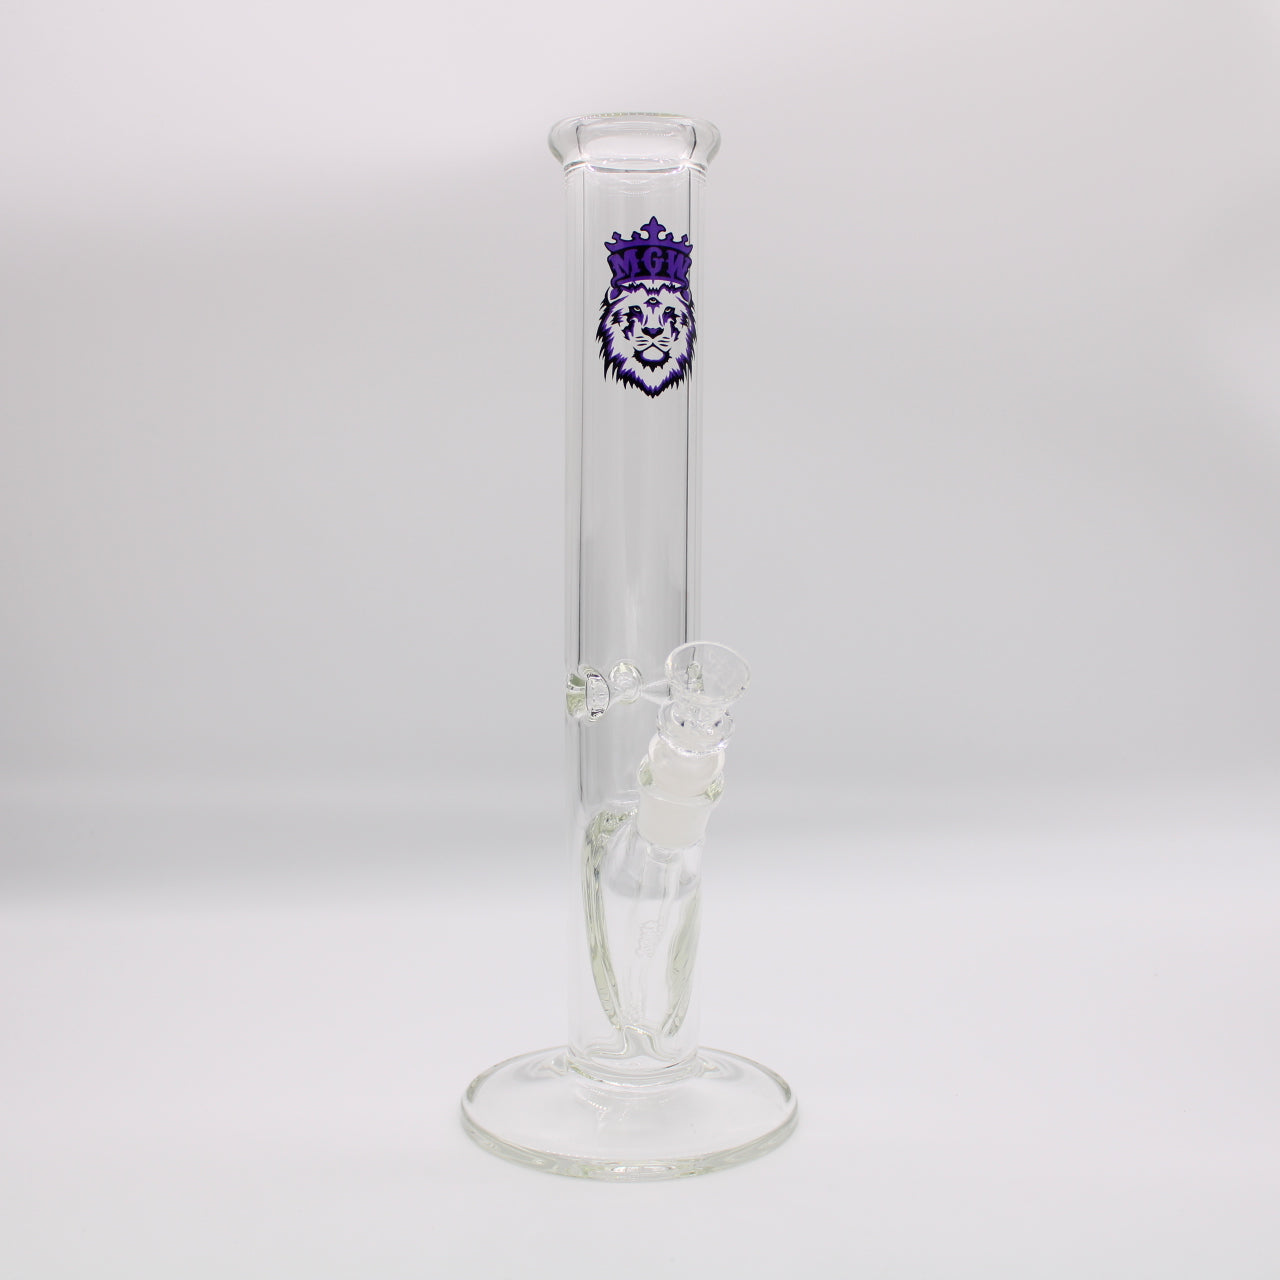 15” straight tube with diffused downstem -7 mm thick - Purple